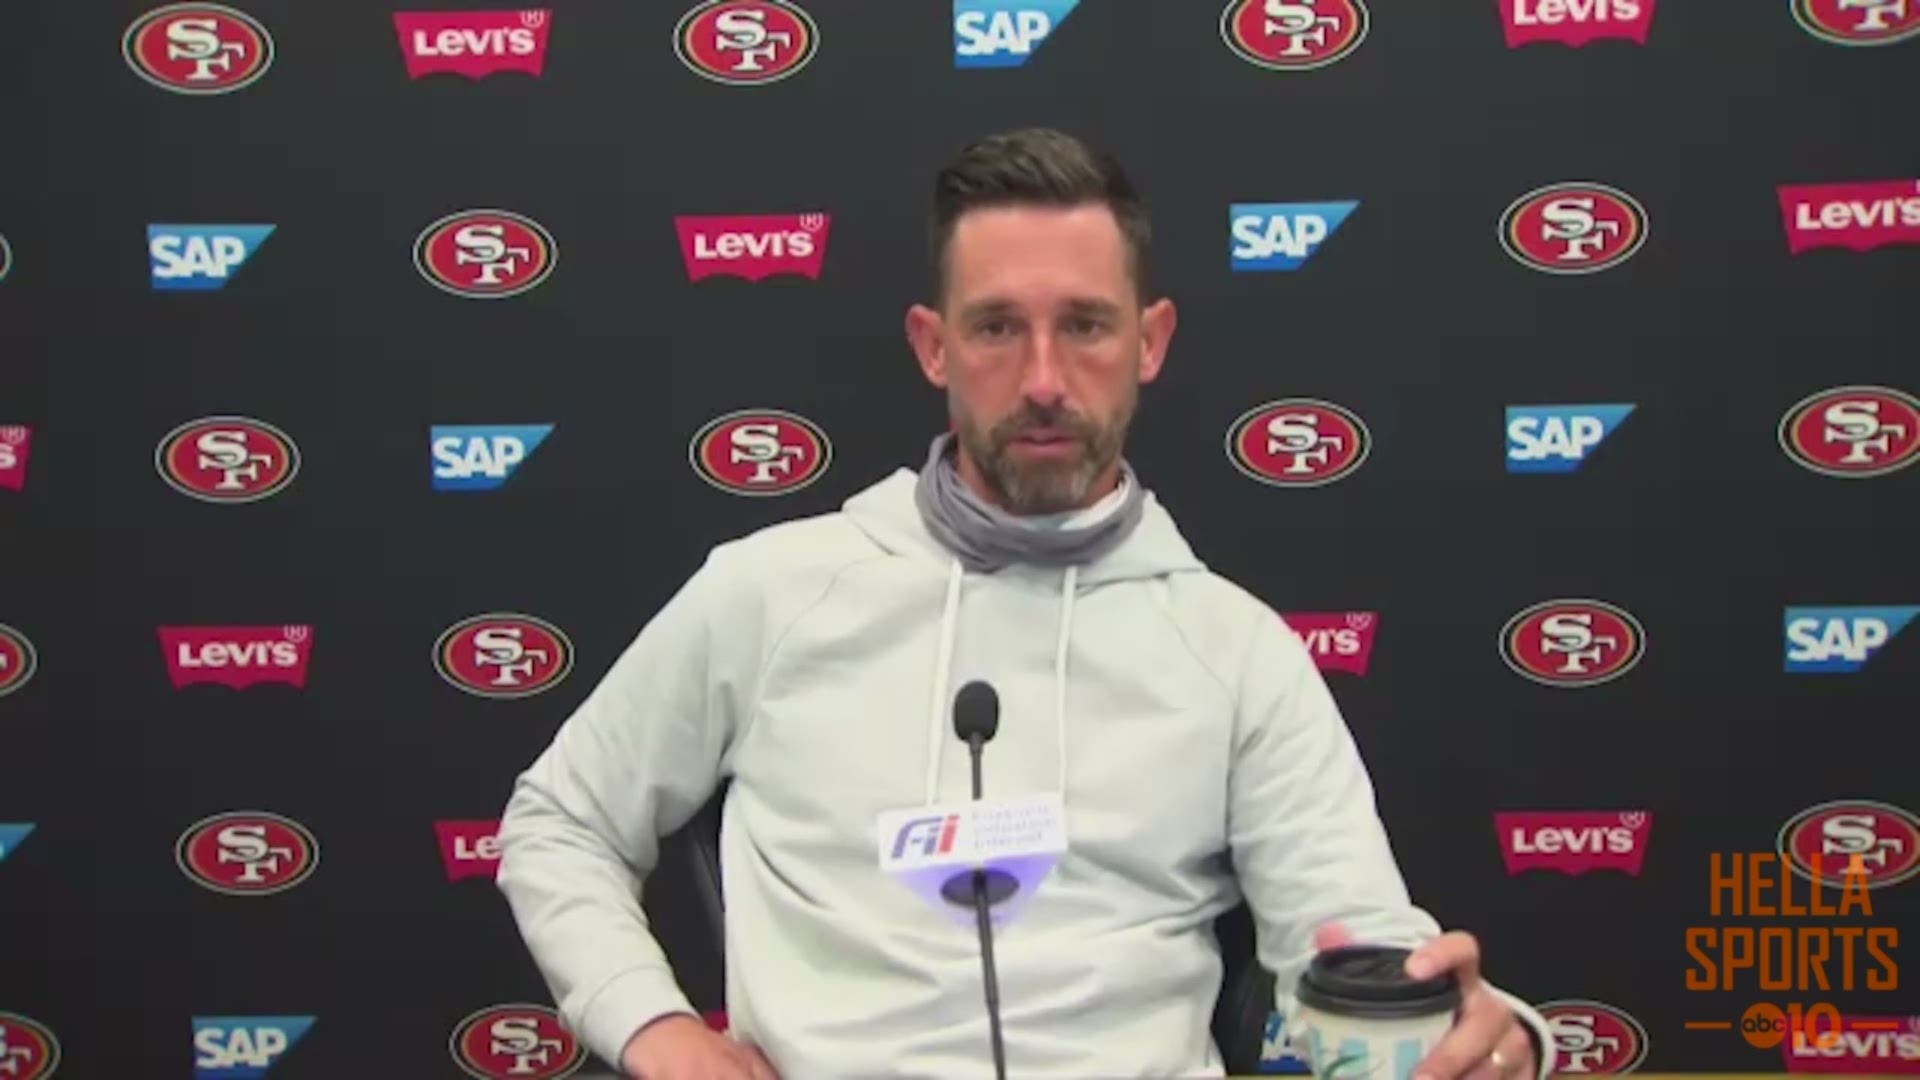 49ers coach Kyle Shanahan discusses the rash of injuries his team sustained in the win over the Jets & the players that will step in in place of those who can't play